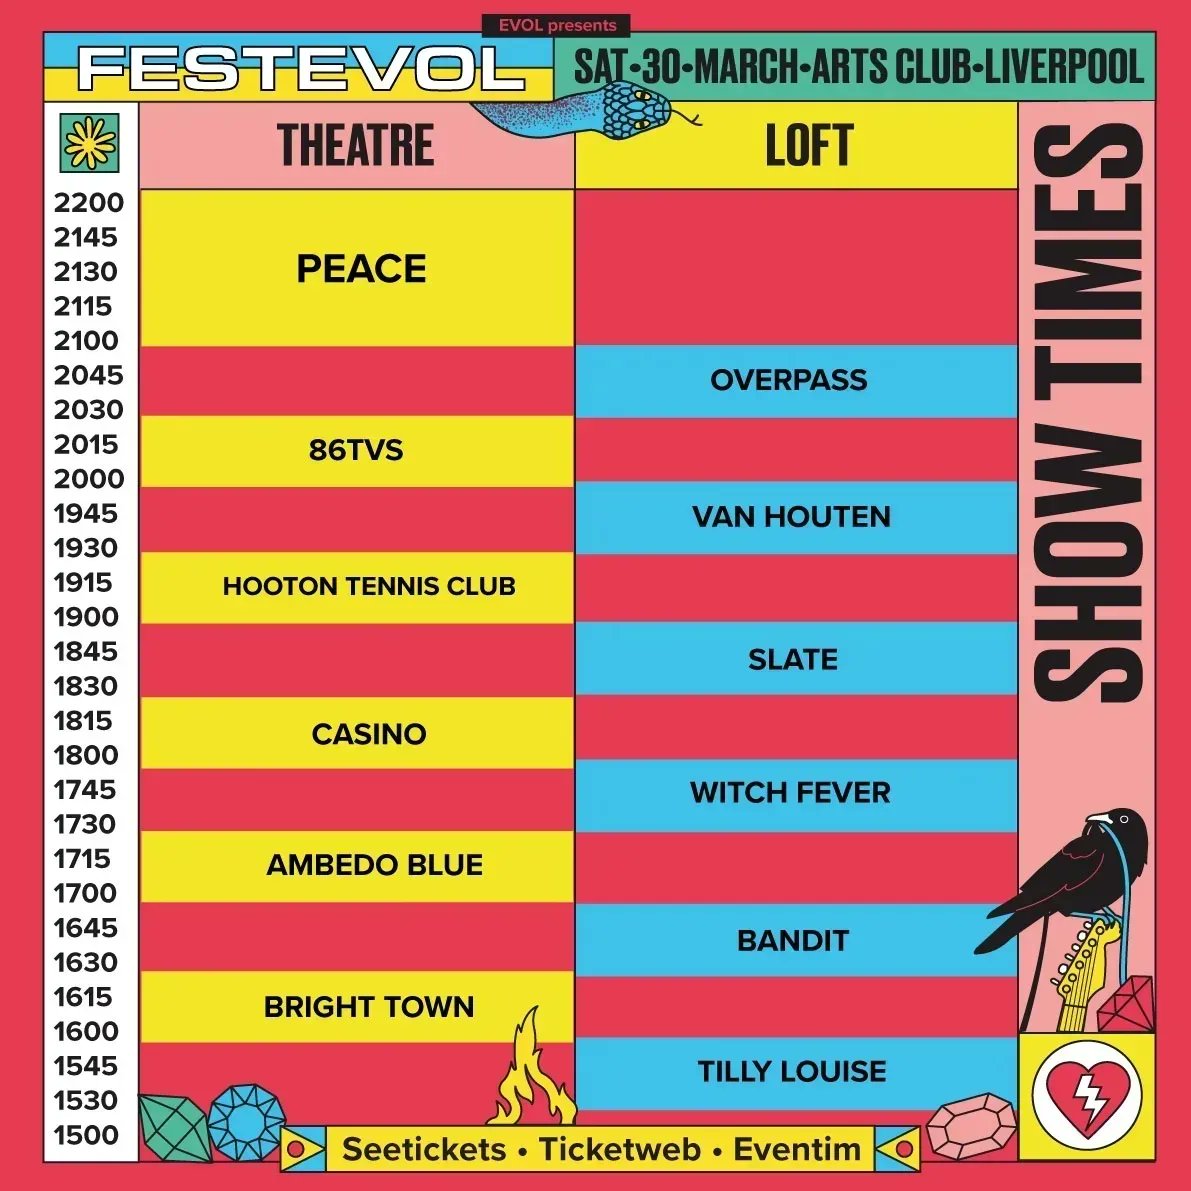 𝐓𝐖𝐎 𝐖𝐄𝐄𝐊𝐒 𝐔𝐍𝐓𝐈𝐋 𝐅𝐄𝐒𝐓𝐄𝐕𝐎𝐋
#FestEvol24. Saturday March 30th. @artsclublpool. Two stages. 12 bands. Absolutely no clashes. All-dayer. 3pm - 10pm. Full lineup and stages times attached. Get involved!

Tickets @seetickets: seetickets.com/event/festevol…